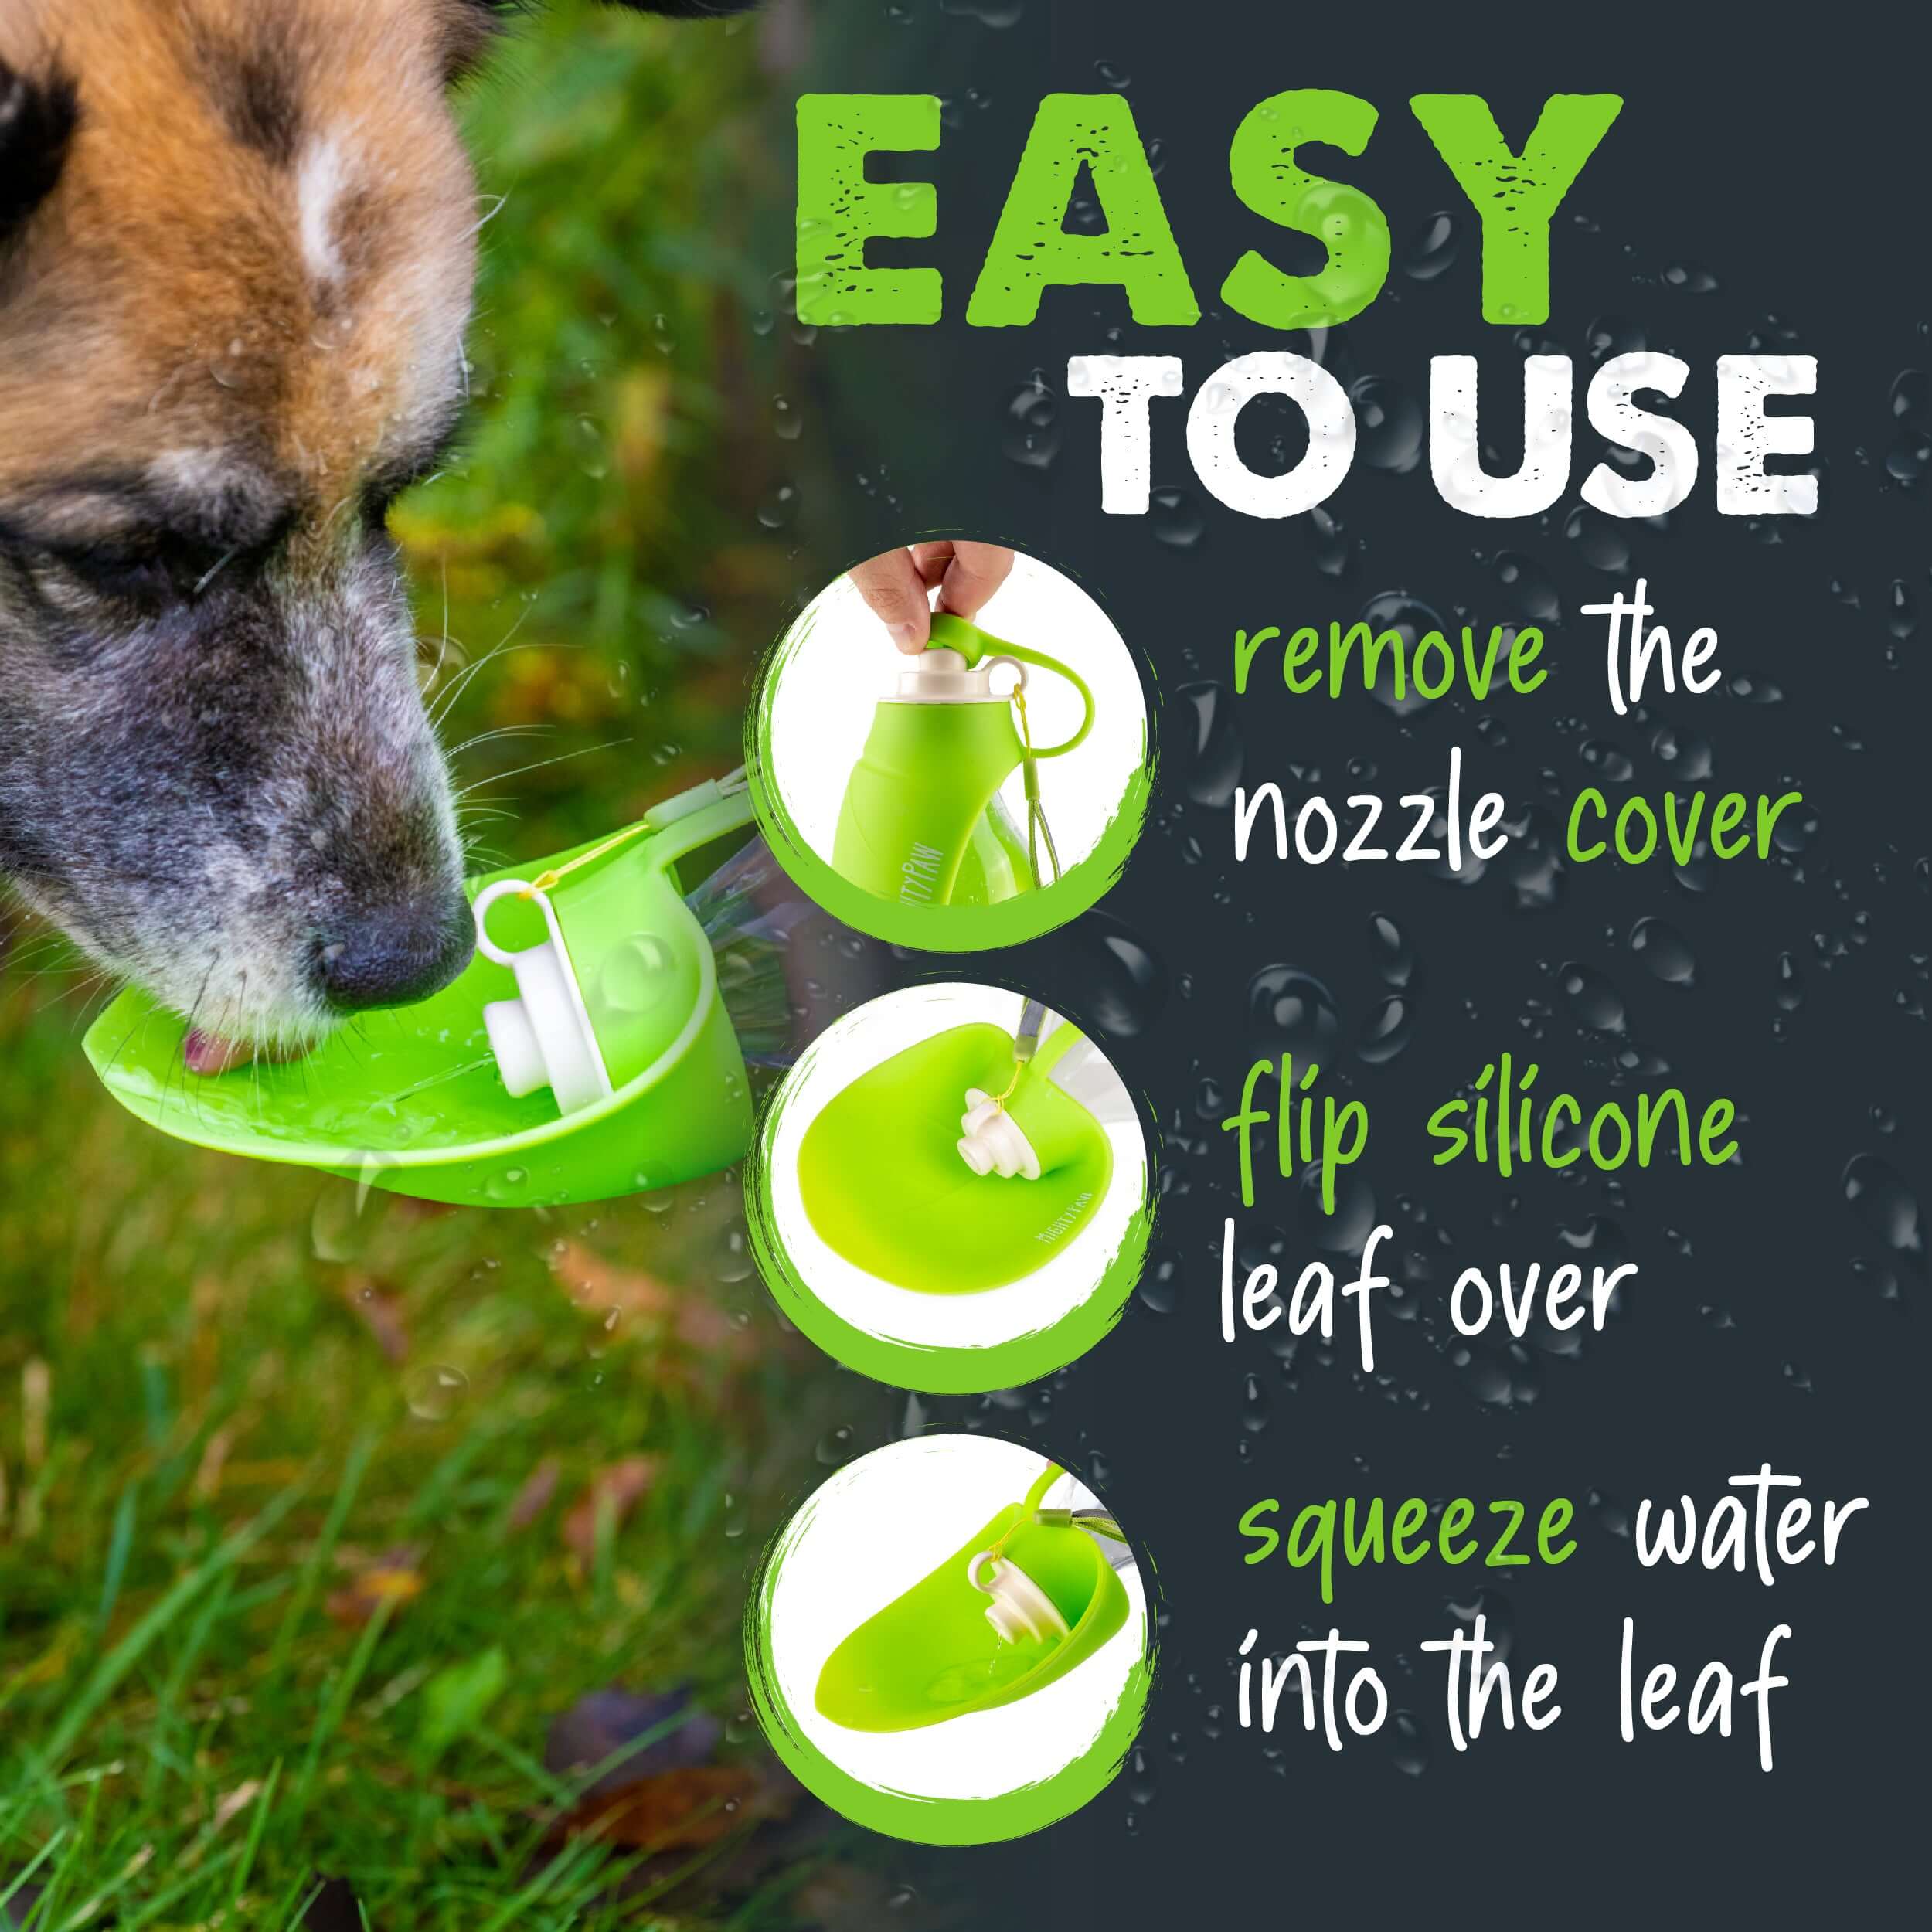 Keep Your Pup Hydrated on the Go with Mighty Paw Travel Dog Water Bottle